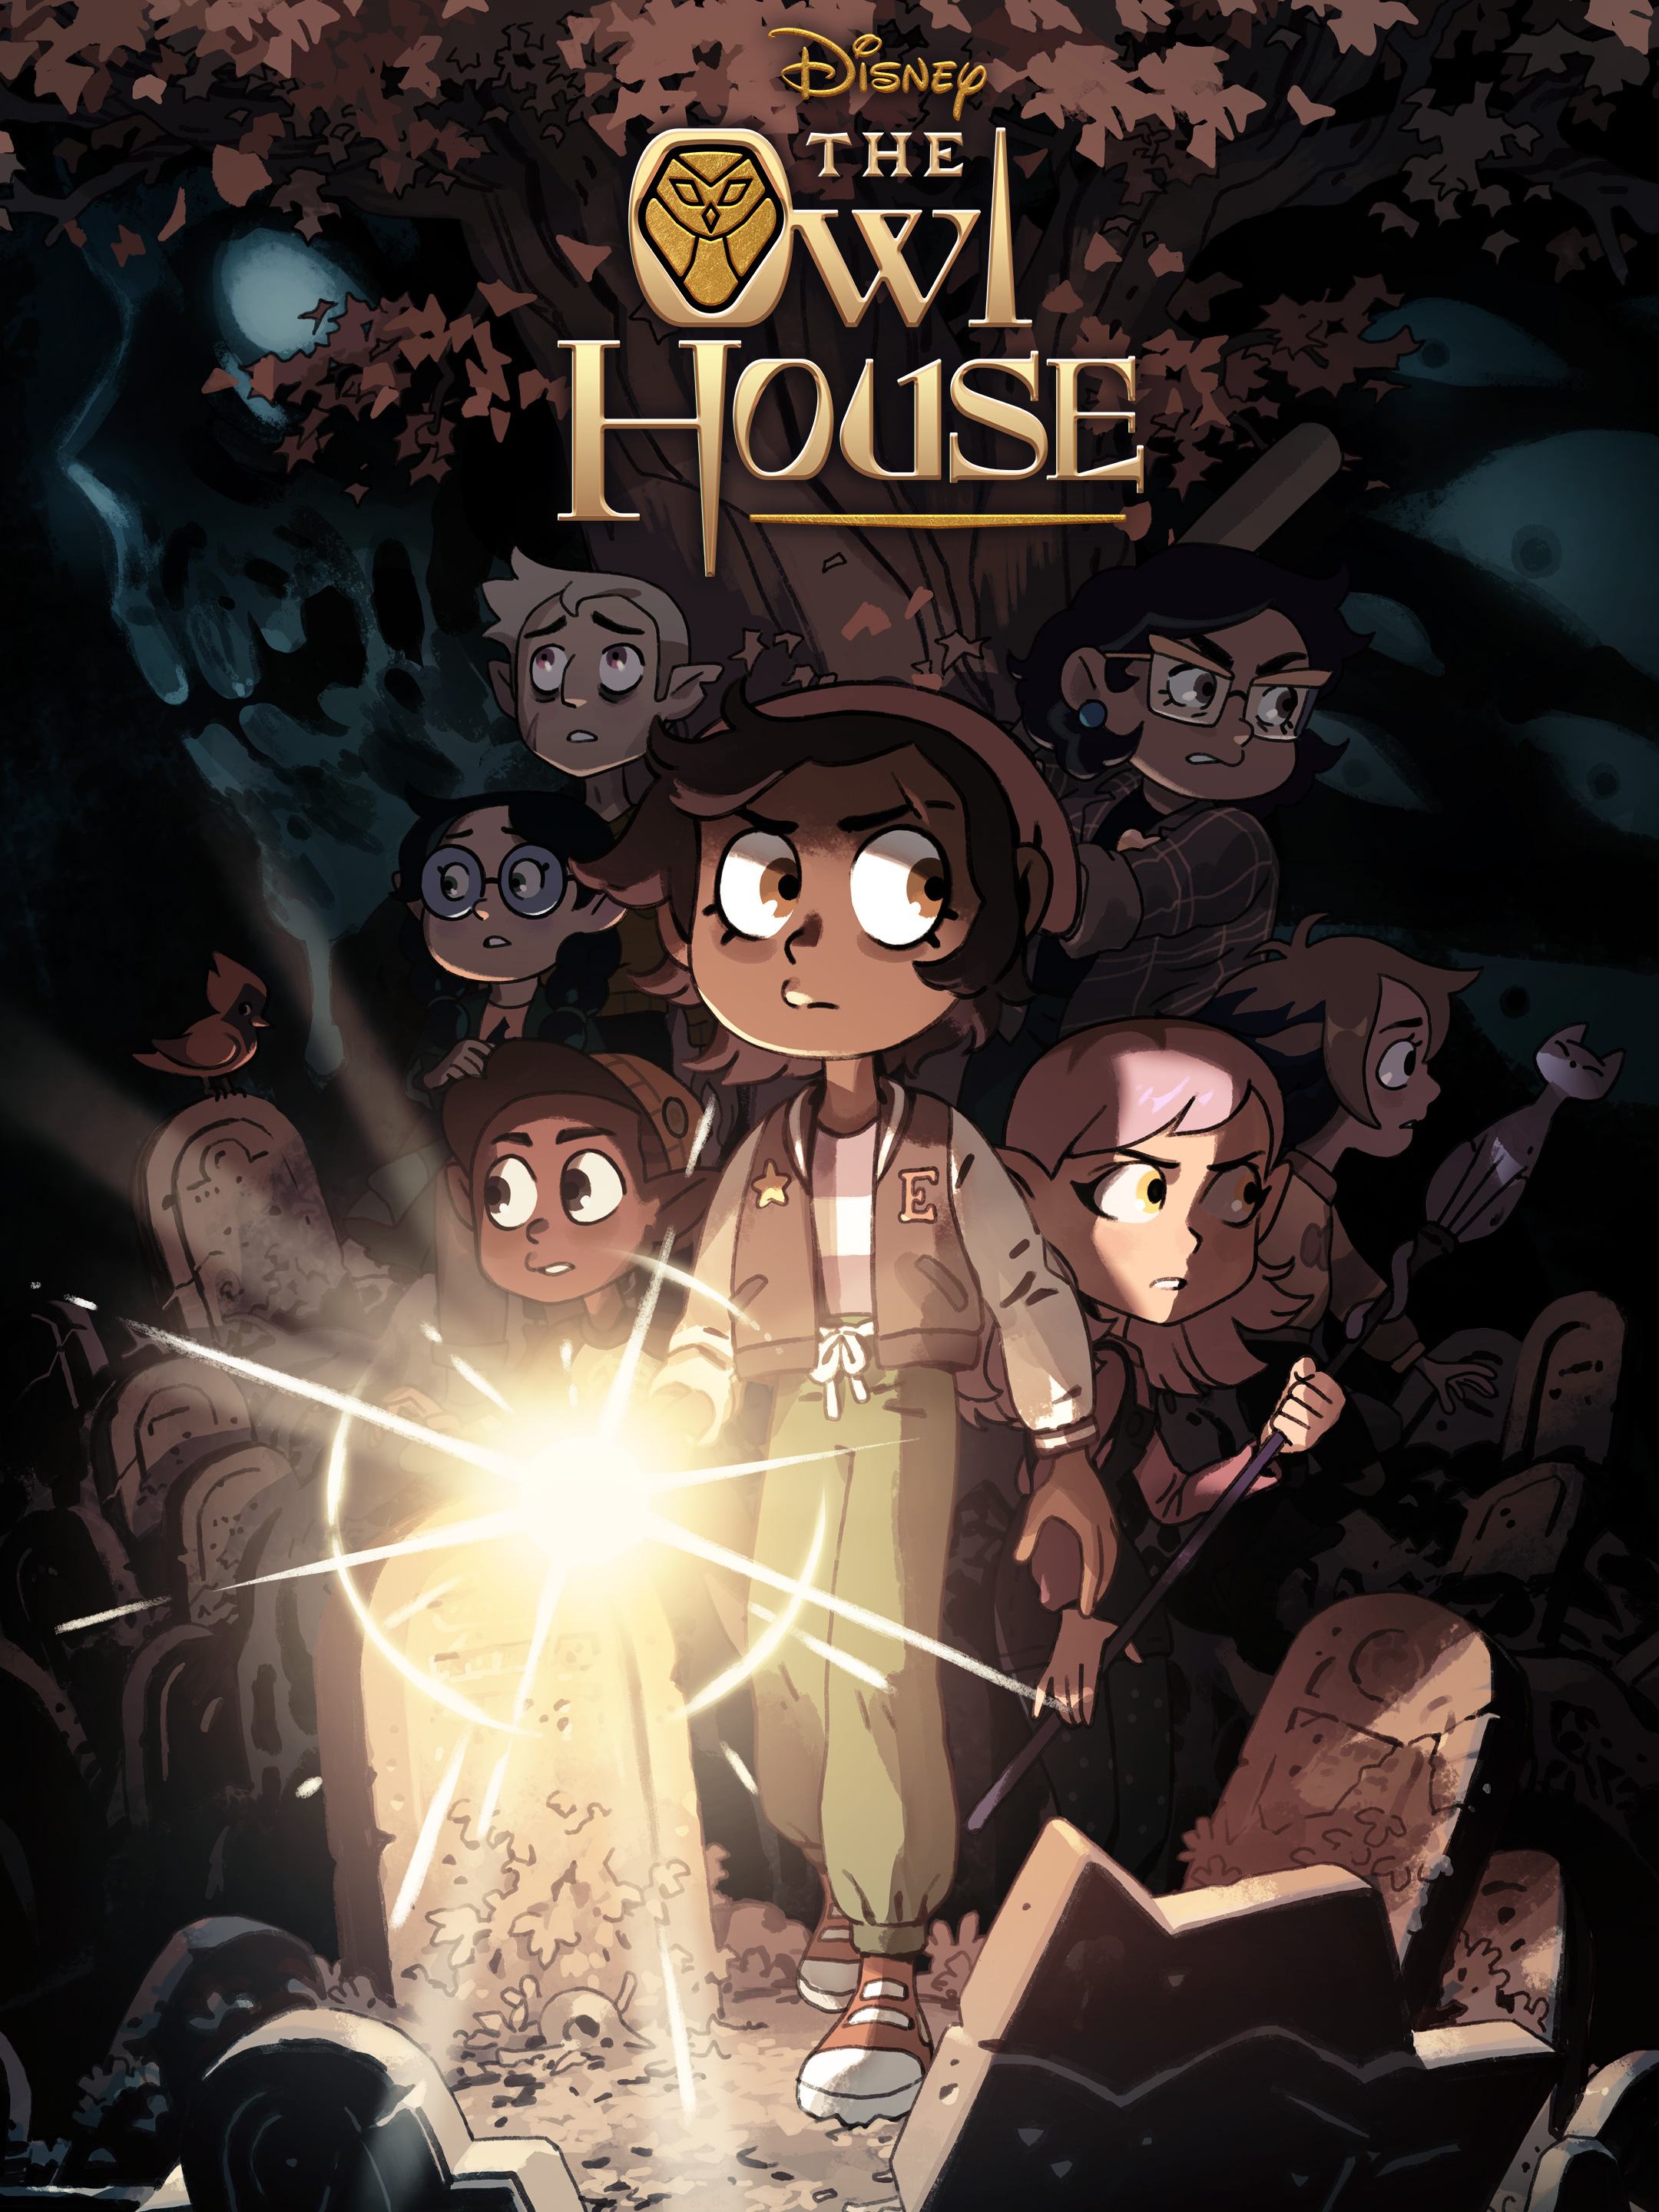 Watch The Owl House season 2 episode 2 streaming online